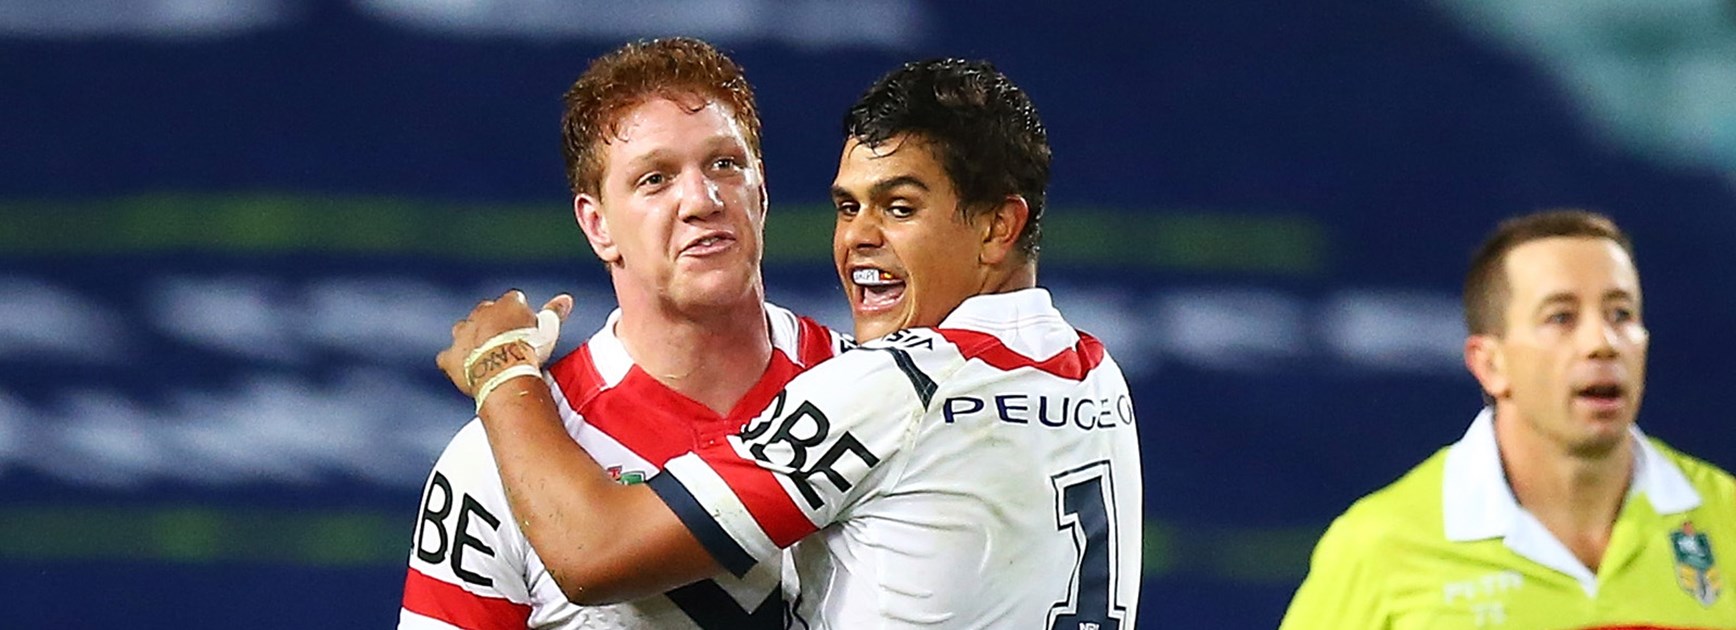 Dylan Napa scored an important try, but it was his defence that set up the win against the Rabbitohs.